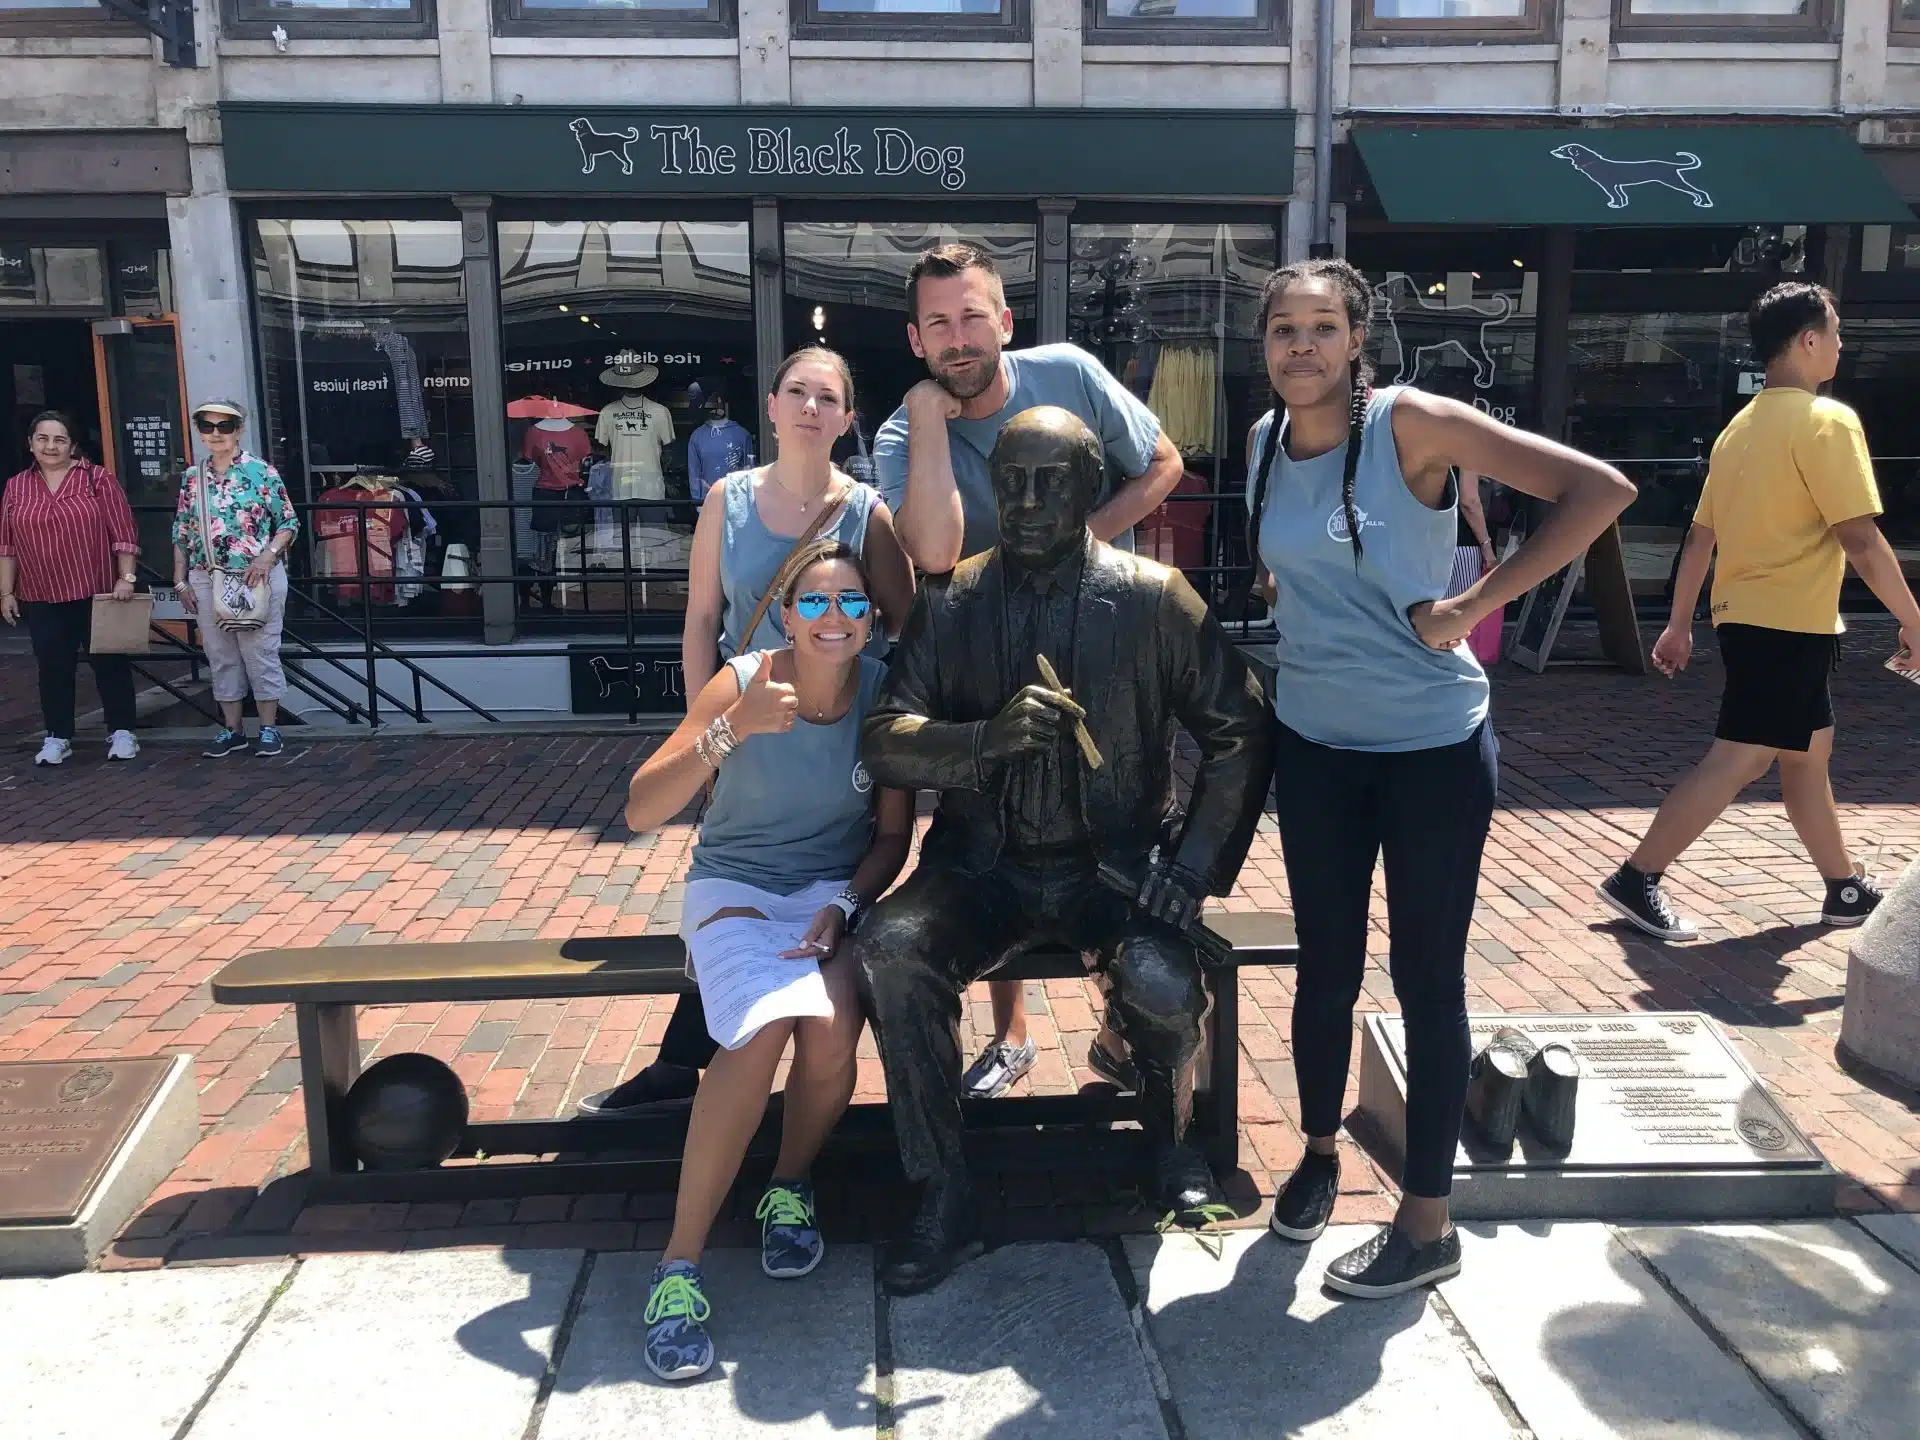 Four people on a corporate team building scavenger hunt post with a statue in Boston